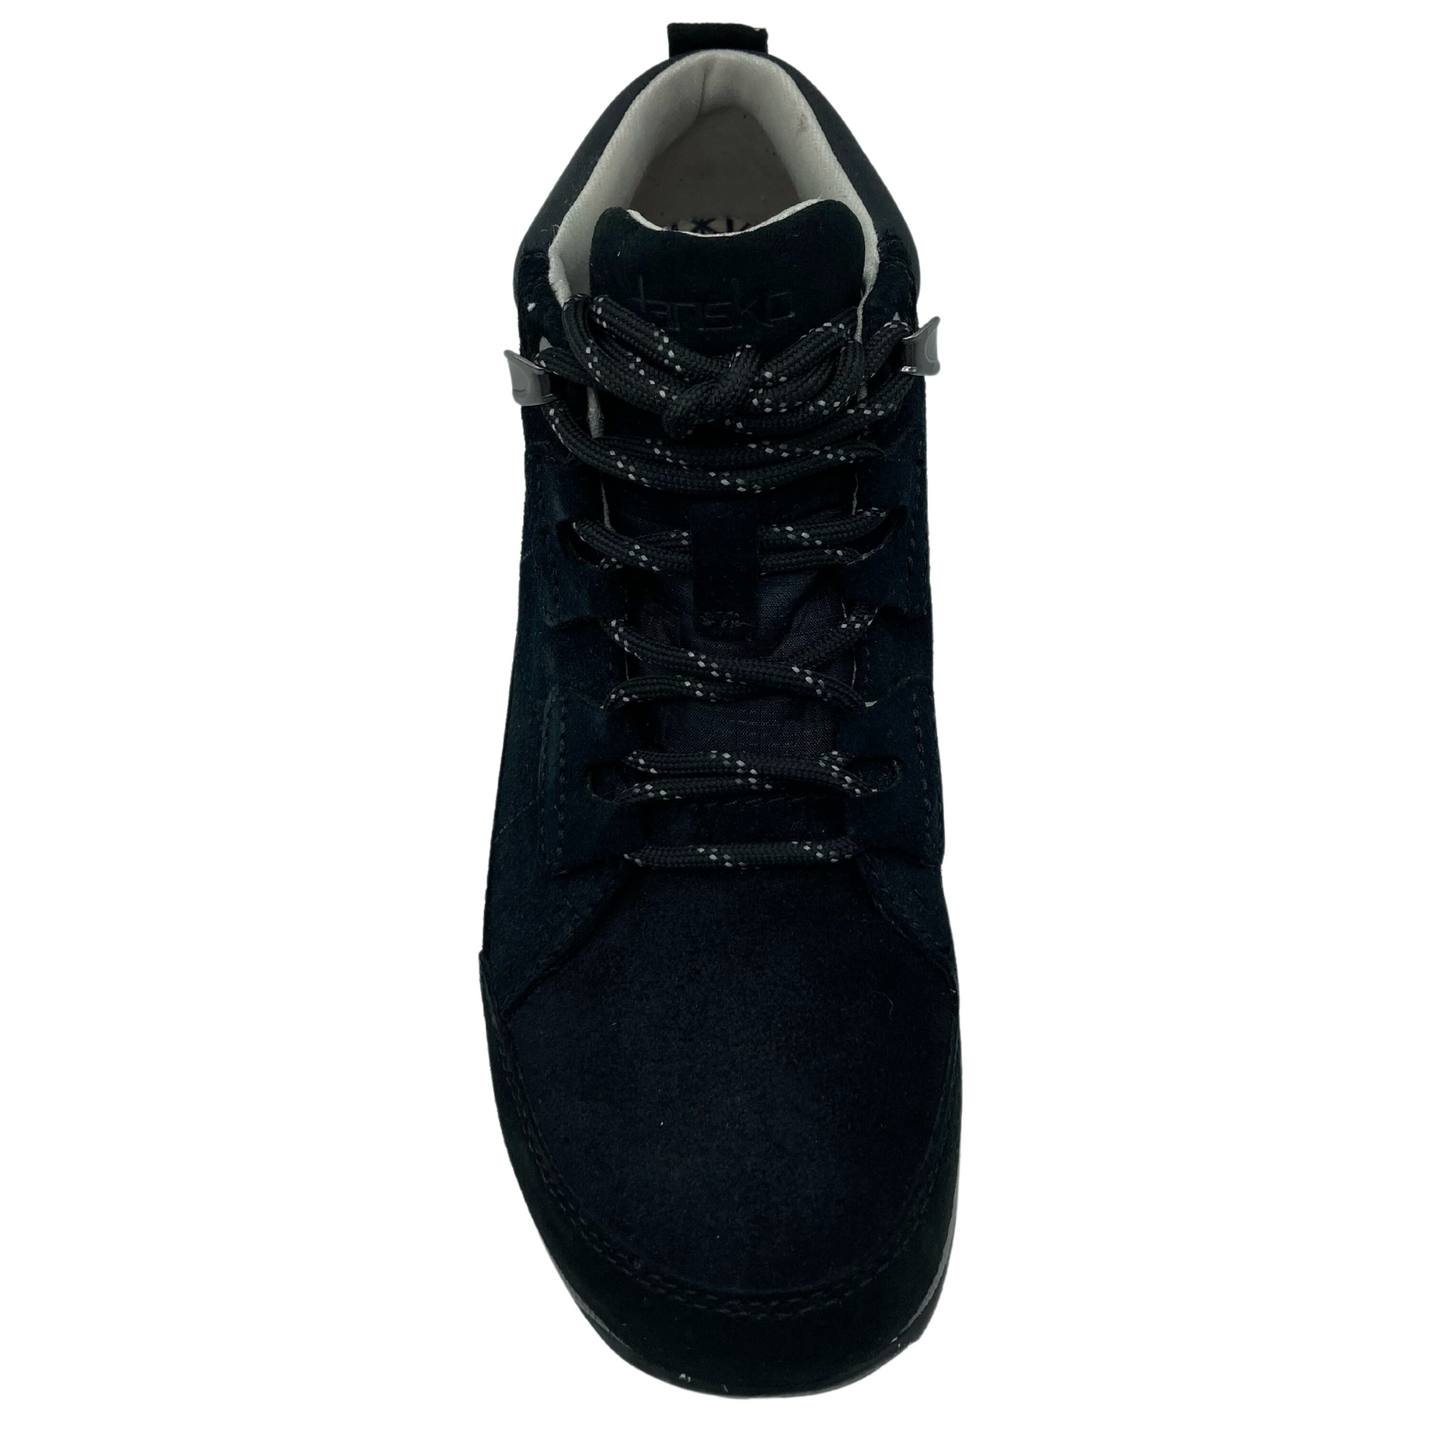 Top down view of suede hiking shoe with black and white laces